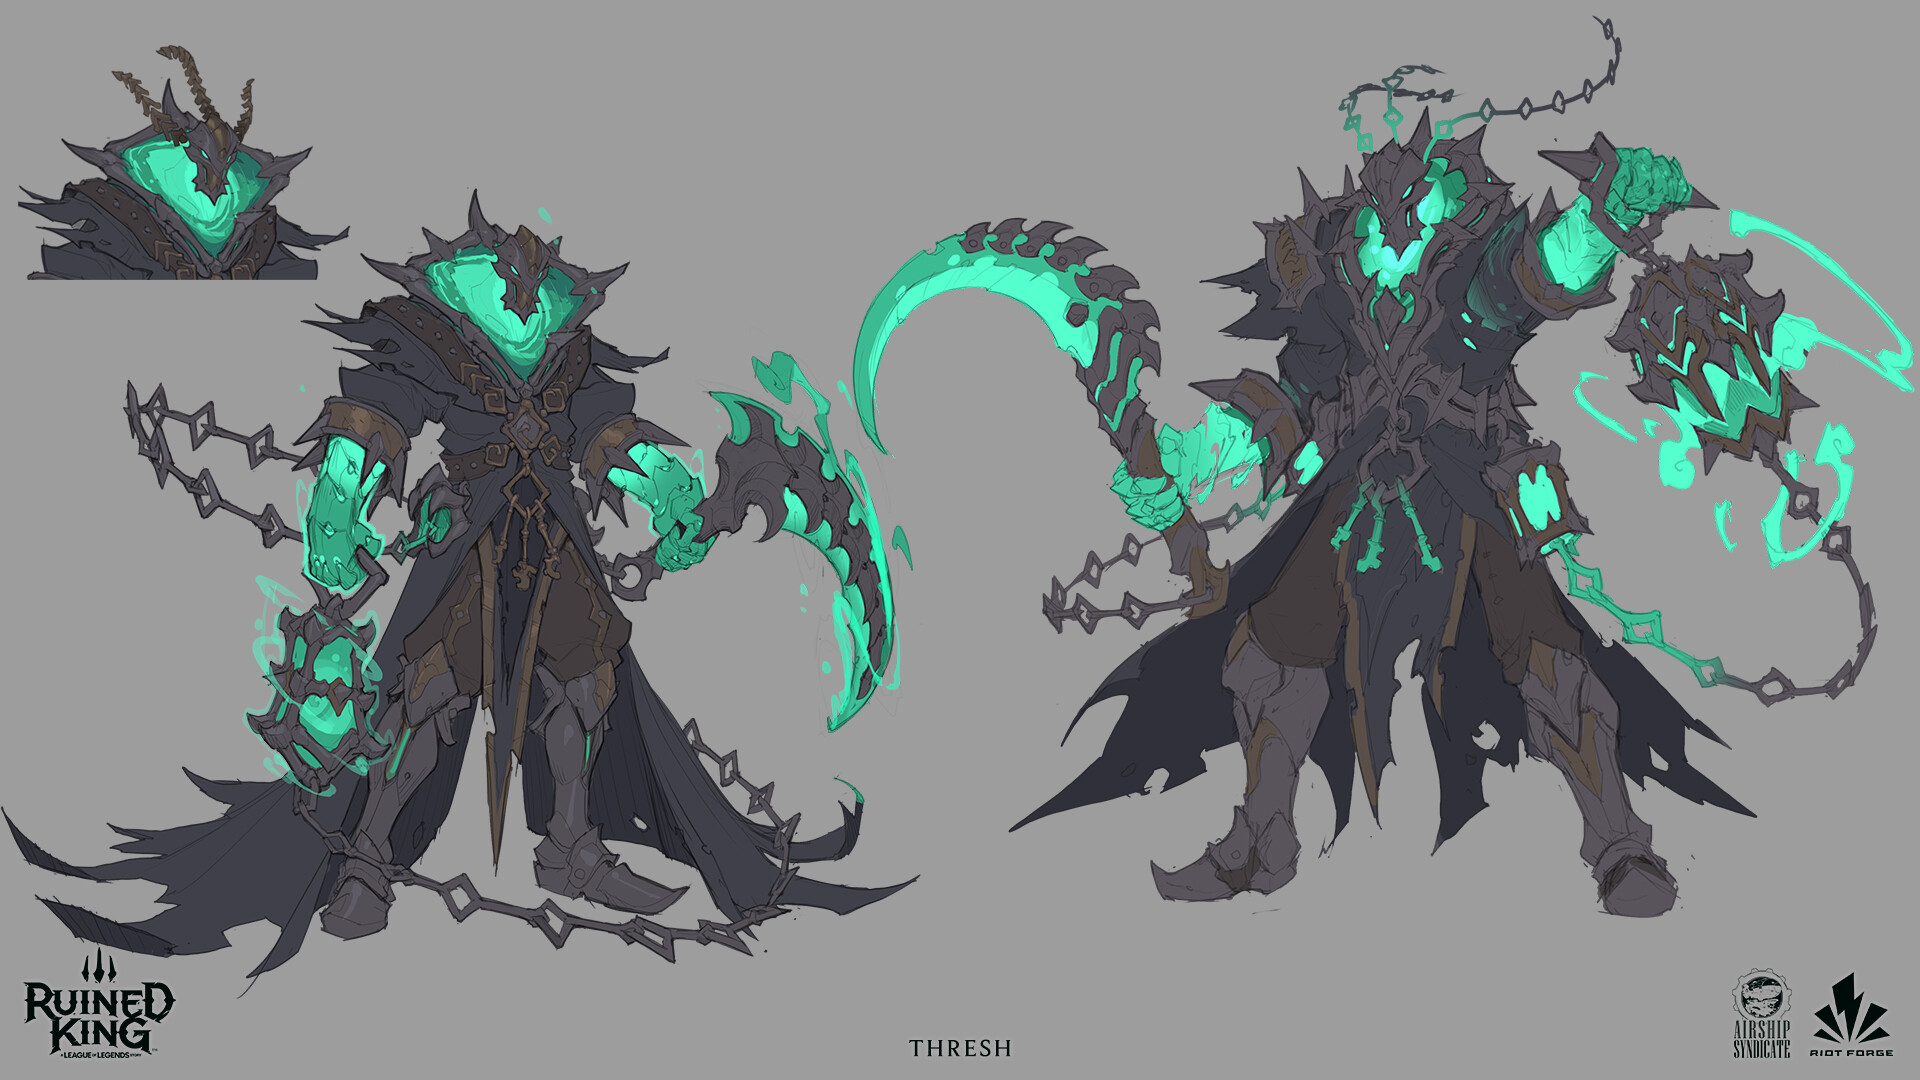 Our version of Thresh.